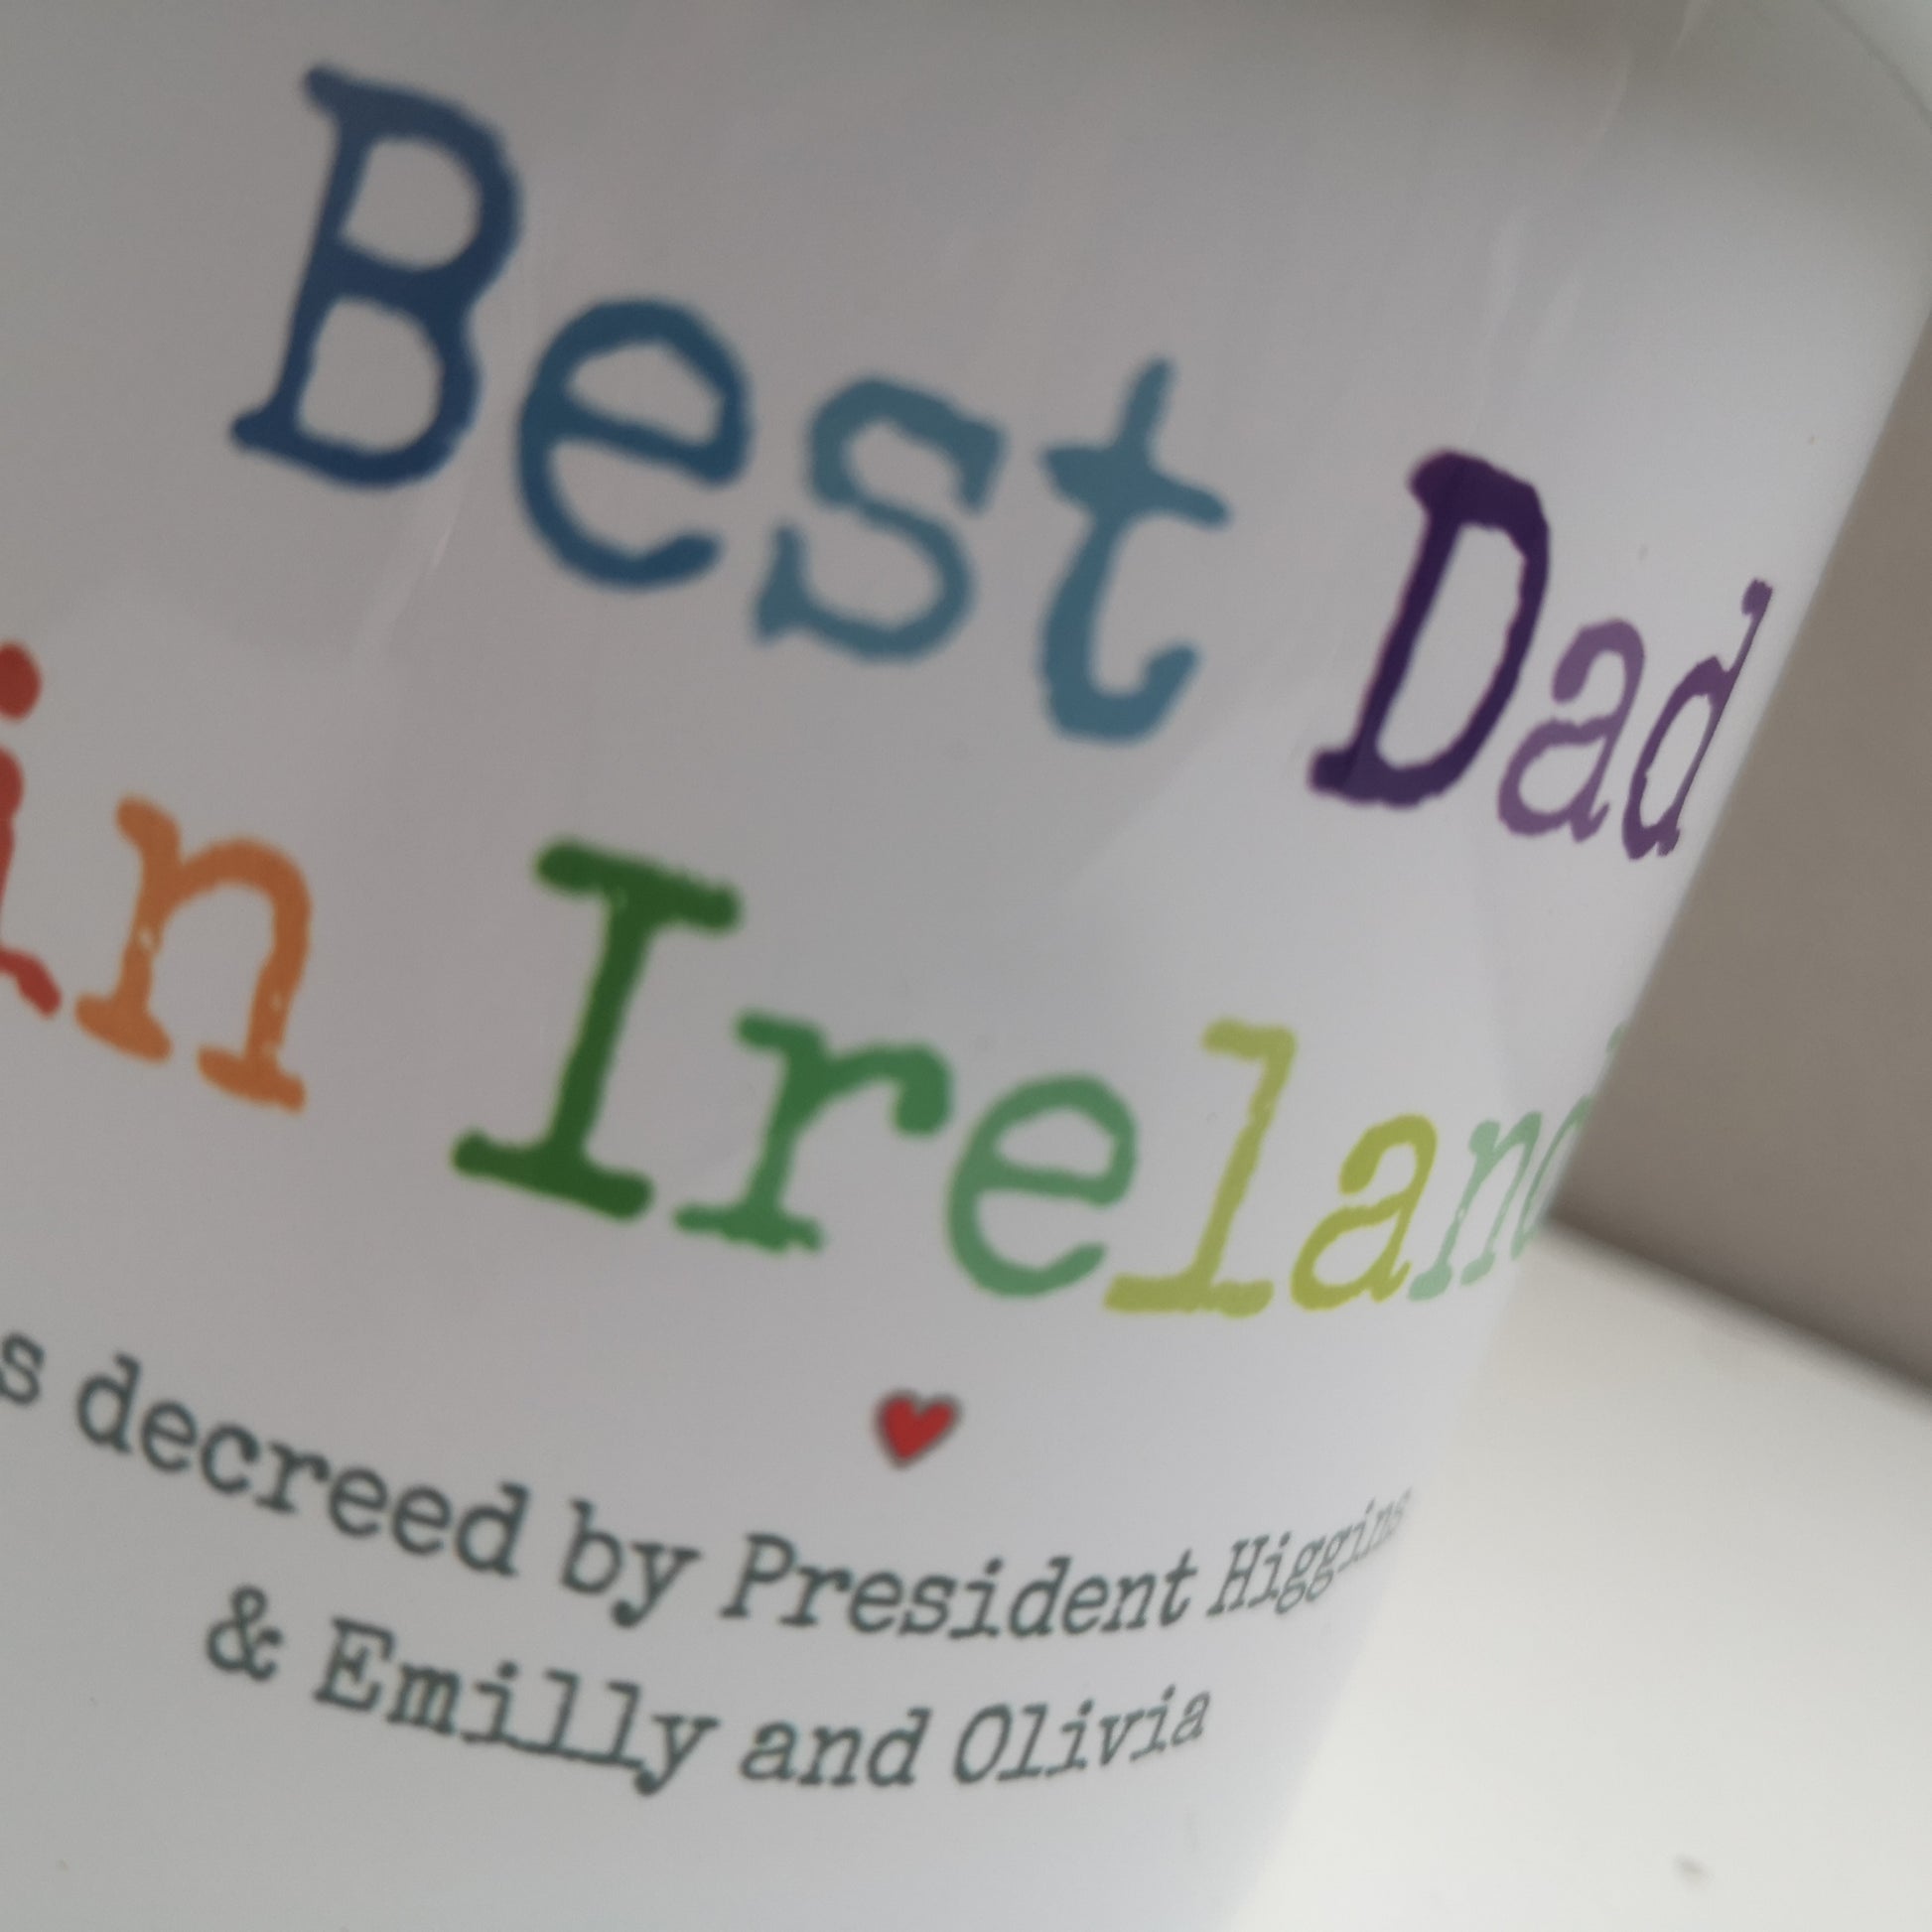 A close up photo of a White enamel mug with a black rim with the following on the front - BEST DAD IN IRELAND, as decreed by President Higgings and personalised names